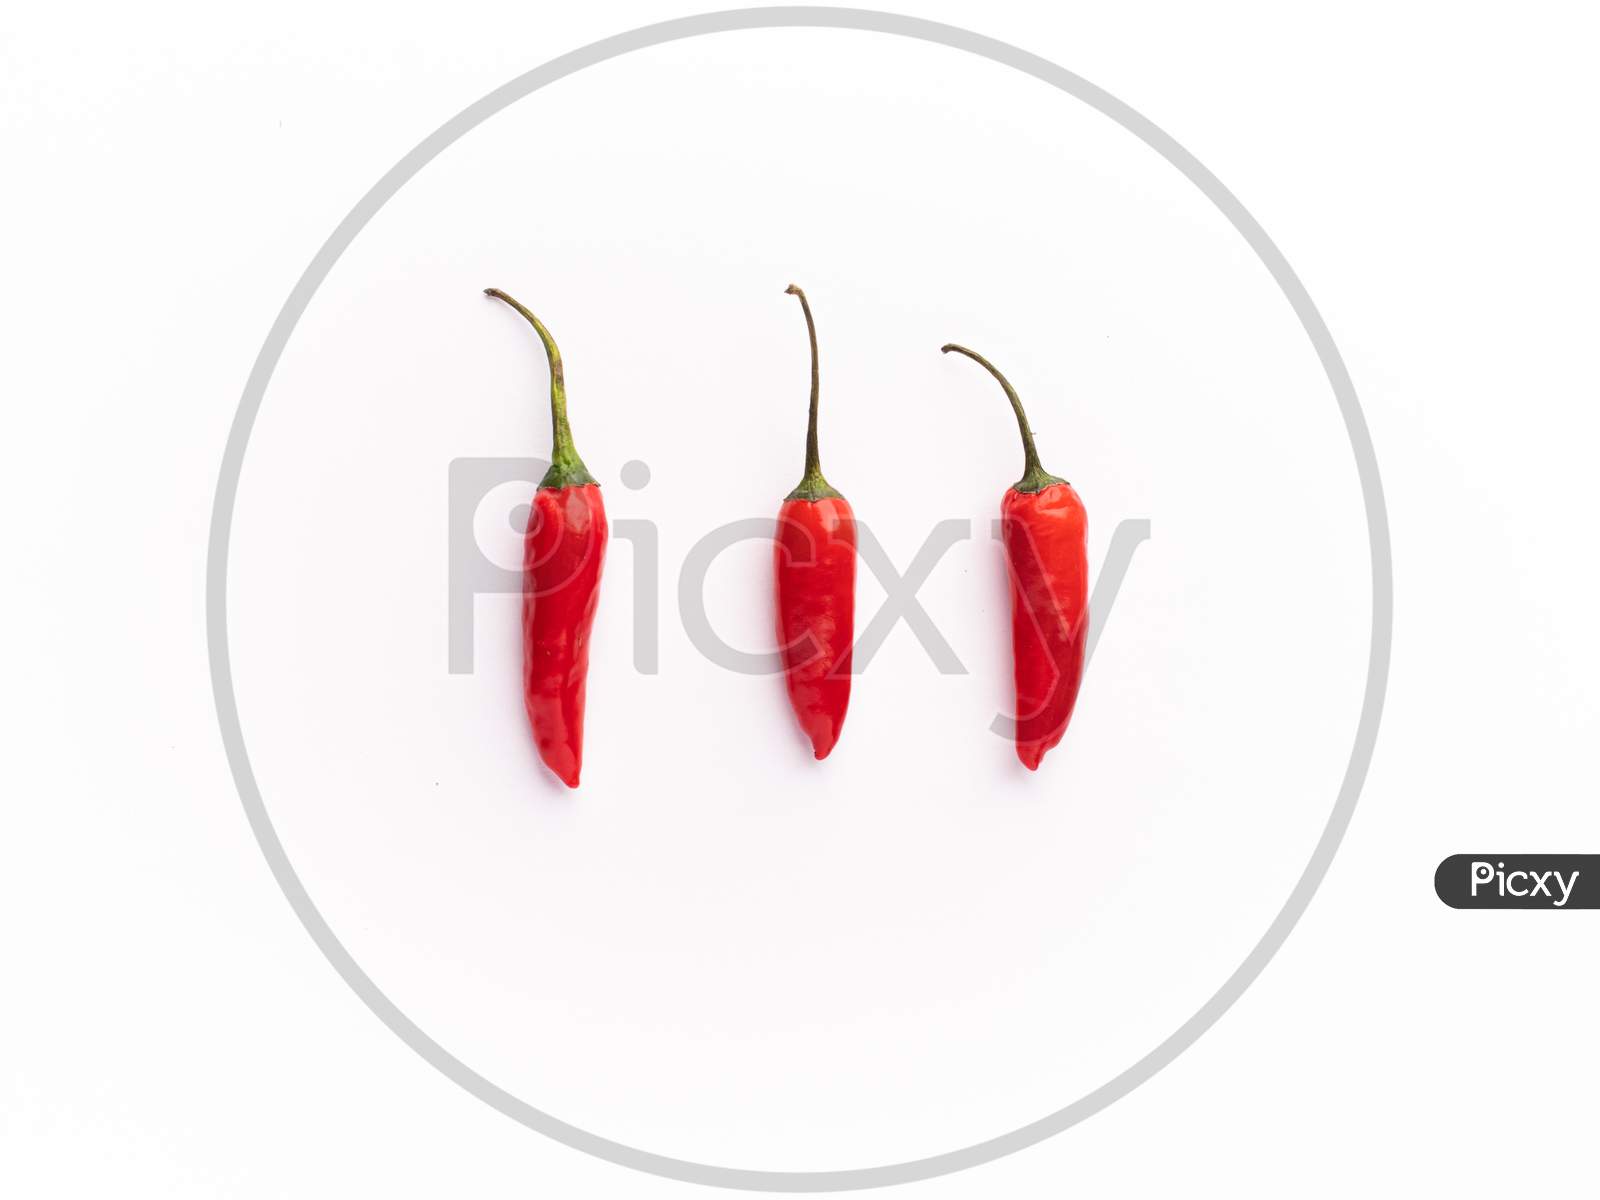 Fresh Red Chili with white background stock image.